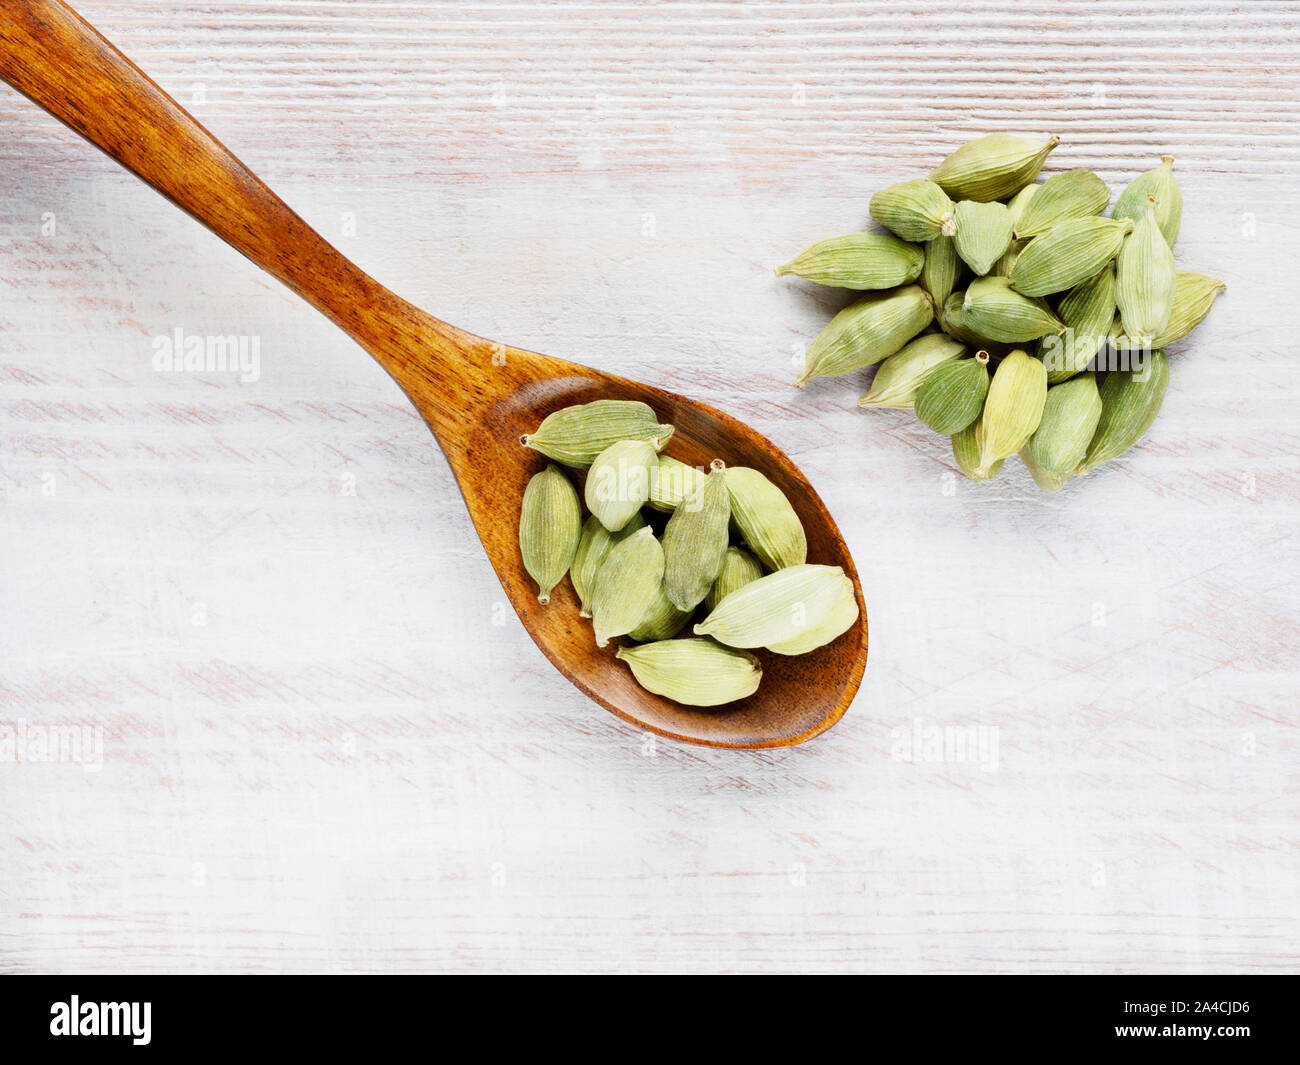 Spice Green cardamom (Elettaria cardamomum) in a spoon diagonally on a brown wooden background Stock Photo